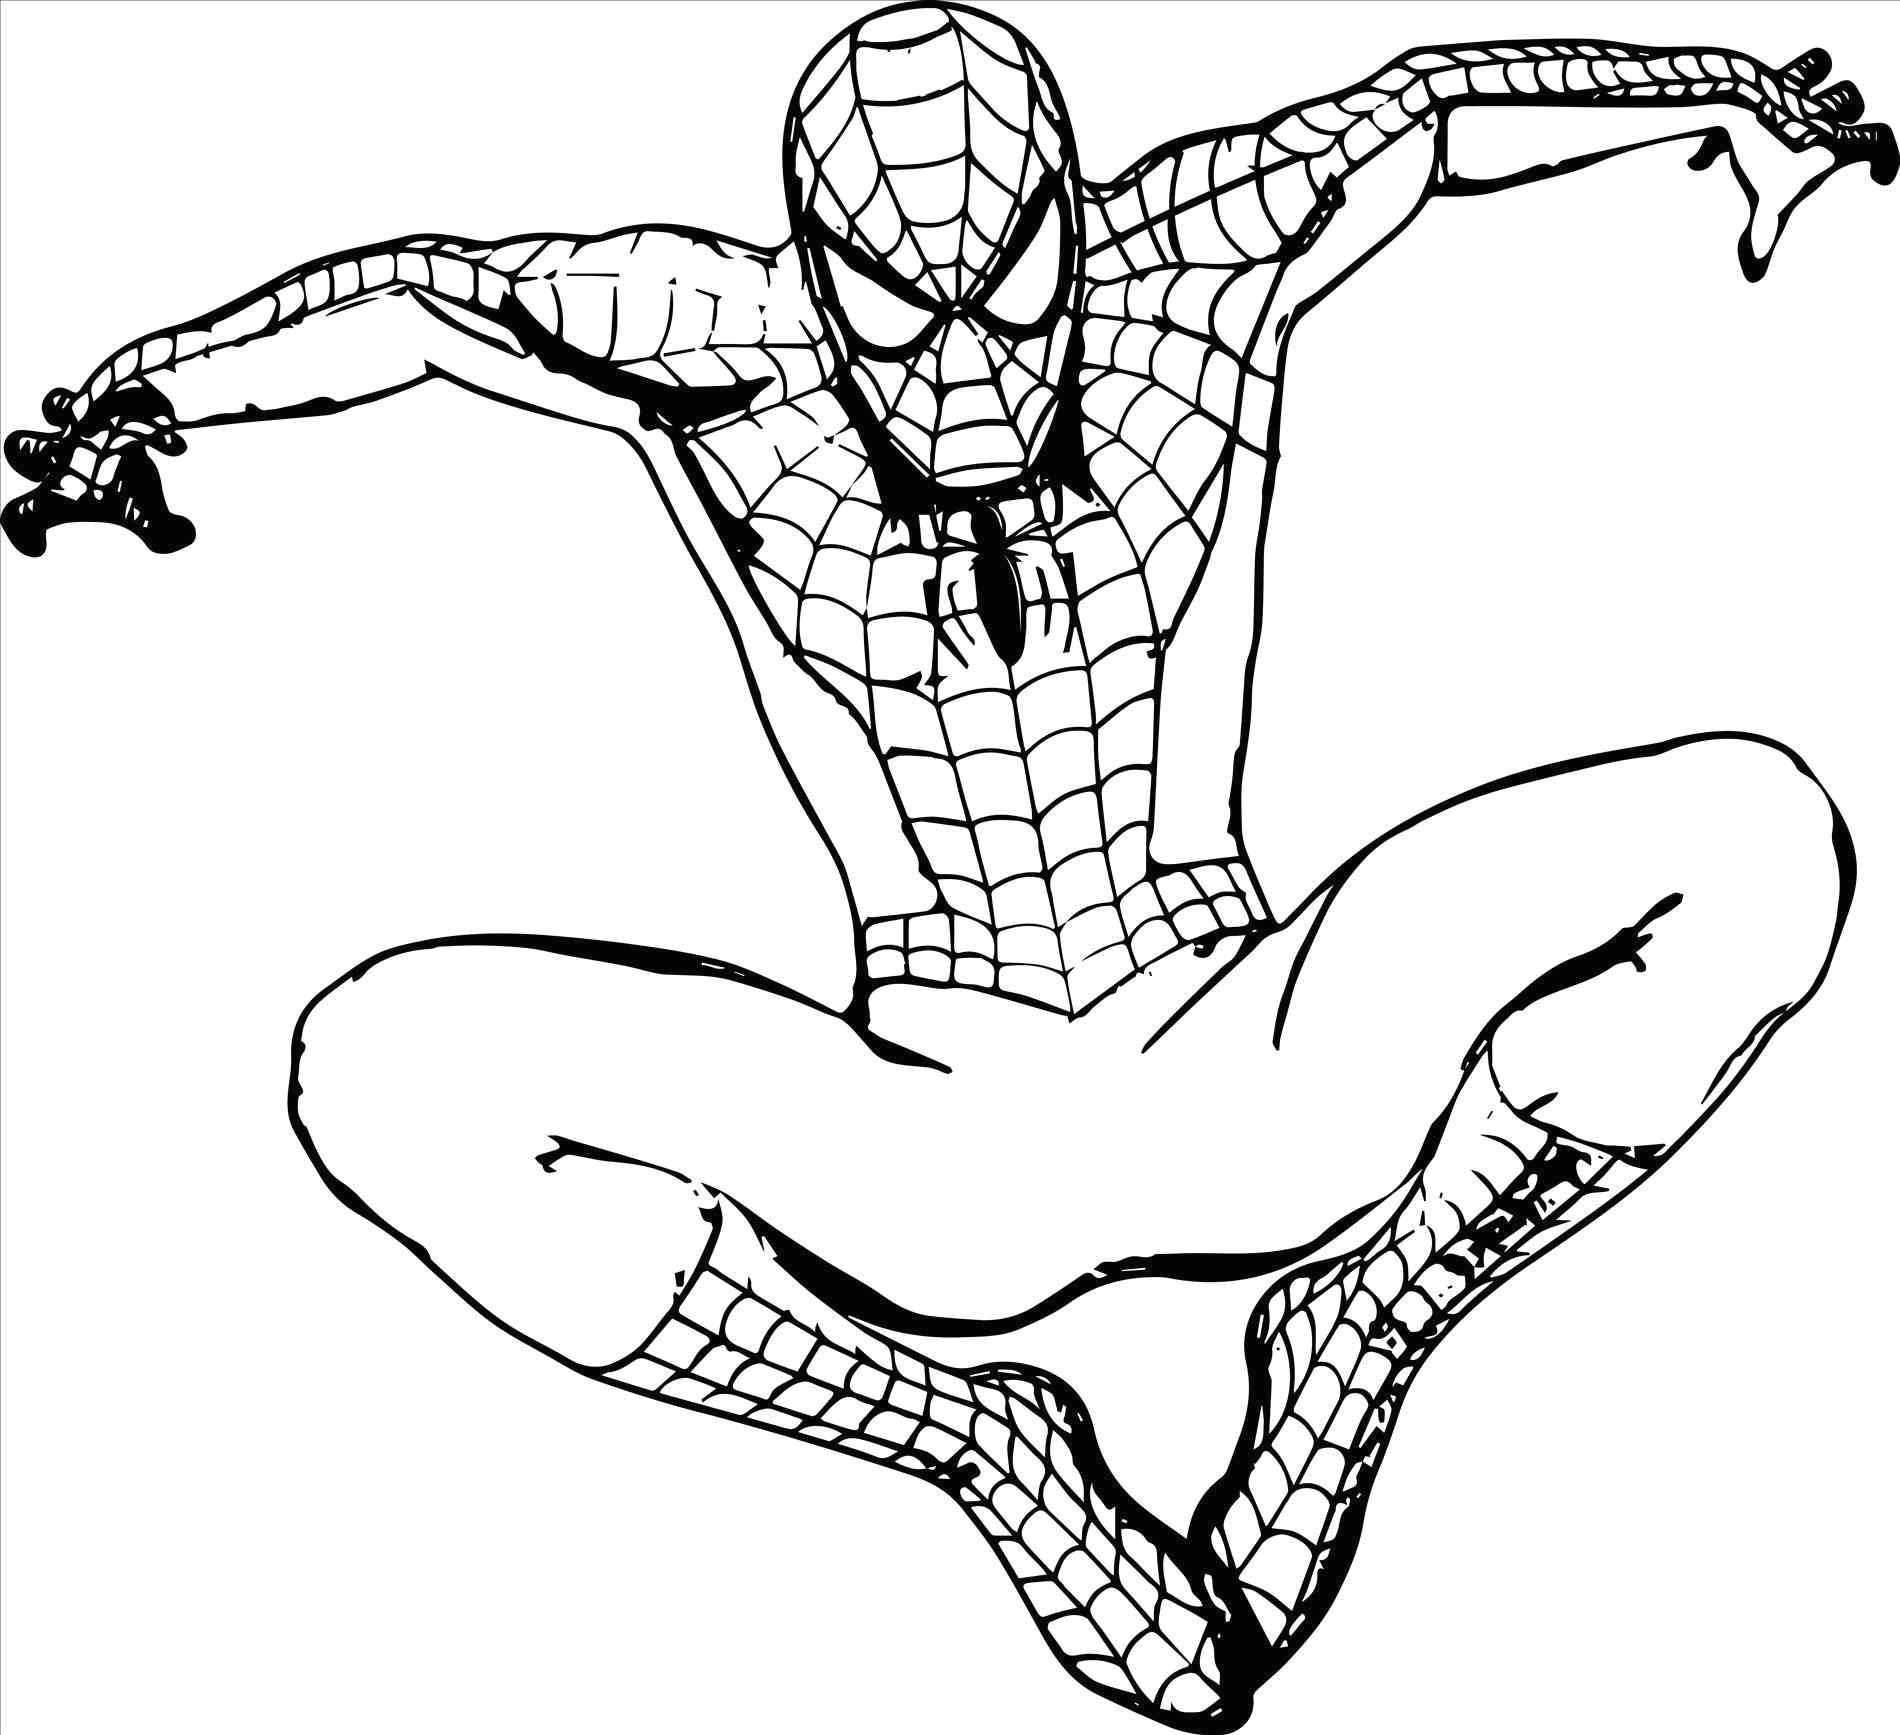 Draw Easy Drawings Of Dragons Superheroes Easy to Draw Spiderman Coloring Pages Luxury 0 0d